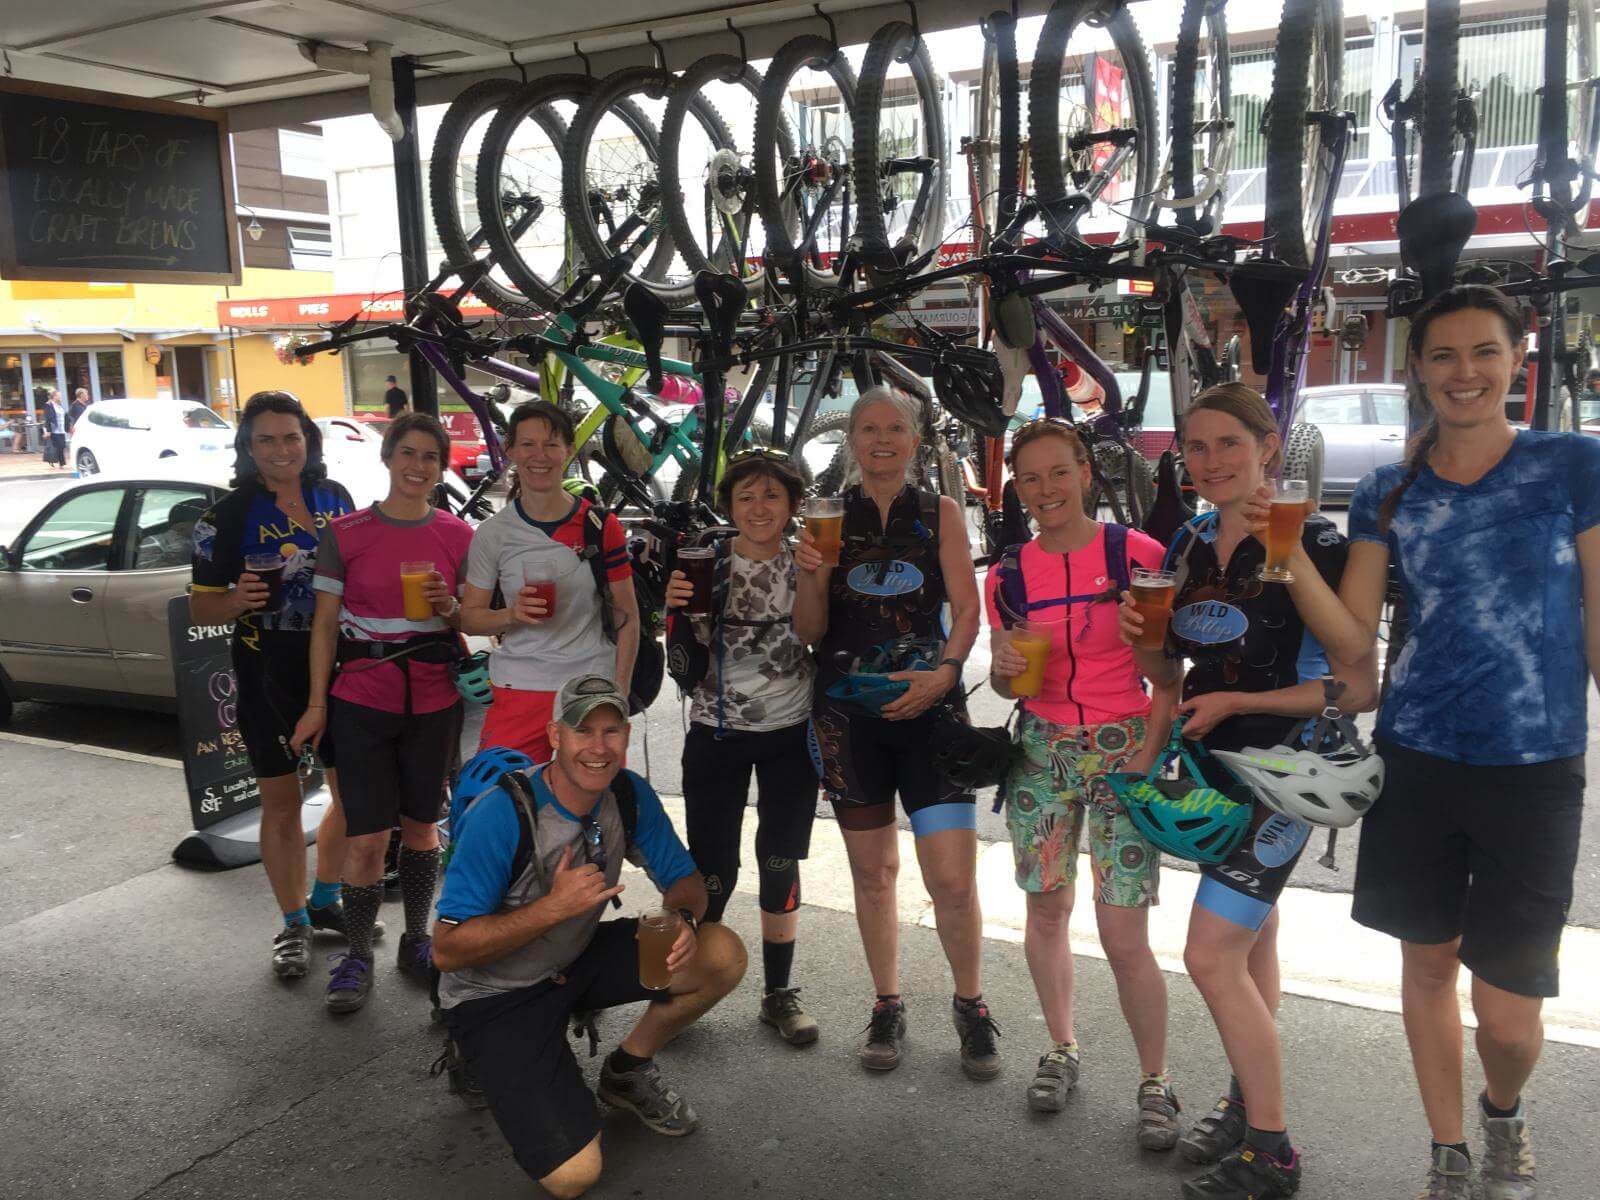 Group of 8 women standing and one man crouching in front of many mountain bikes hanging from ceiling of bike shop